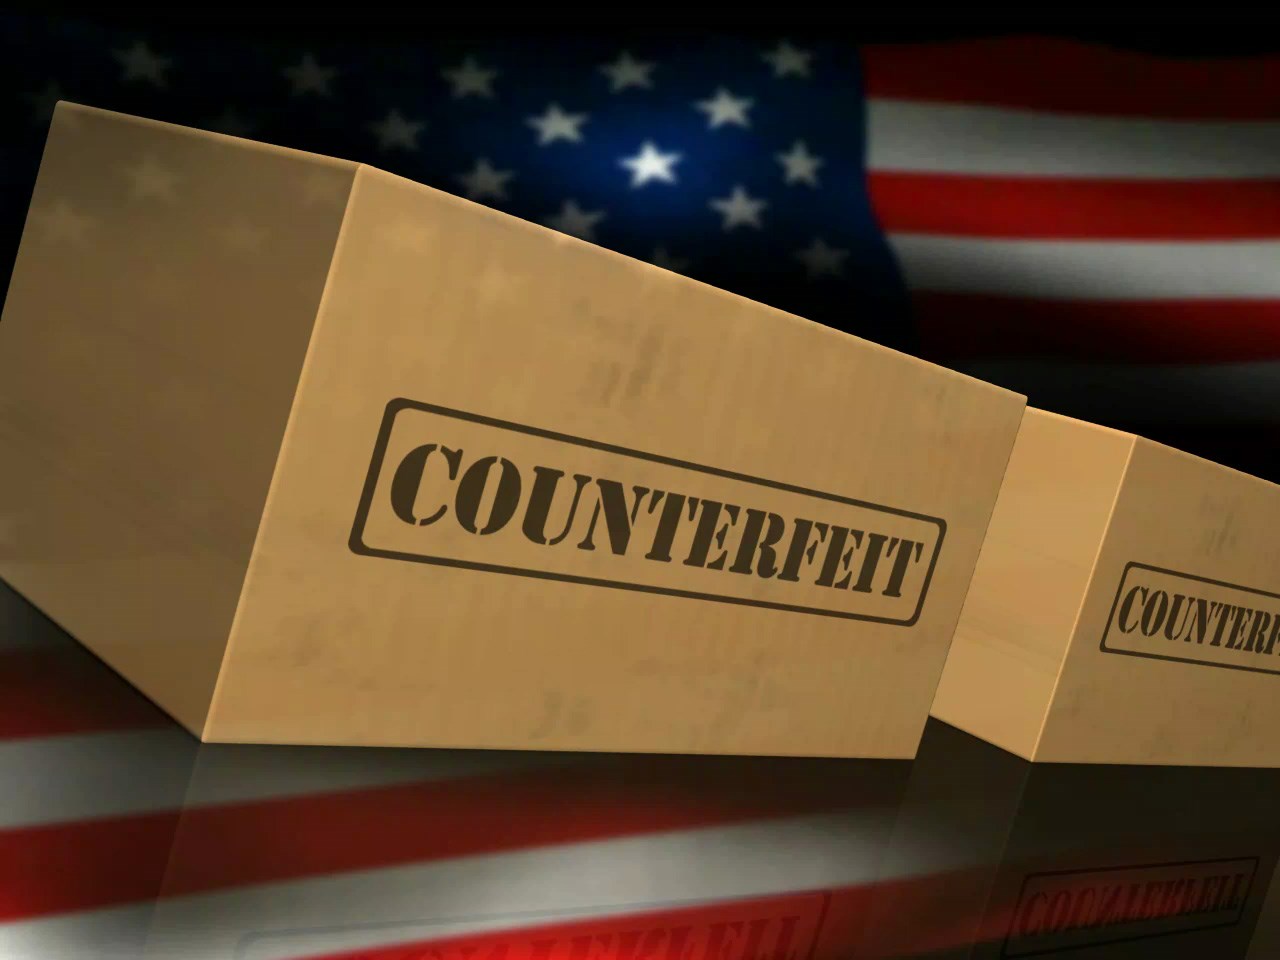 Faking it: The dangers of buying counterfeit goods